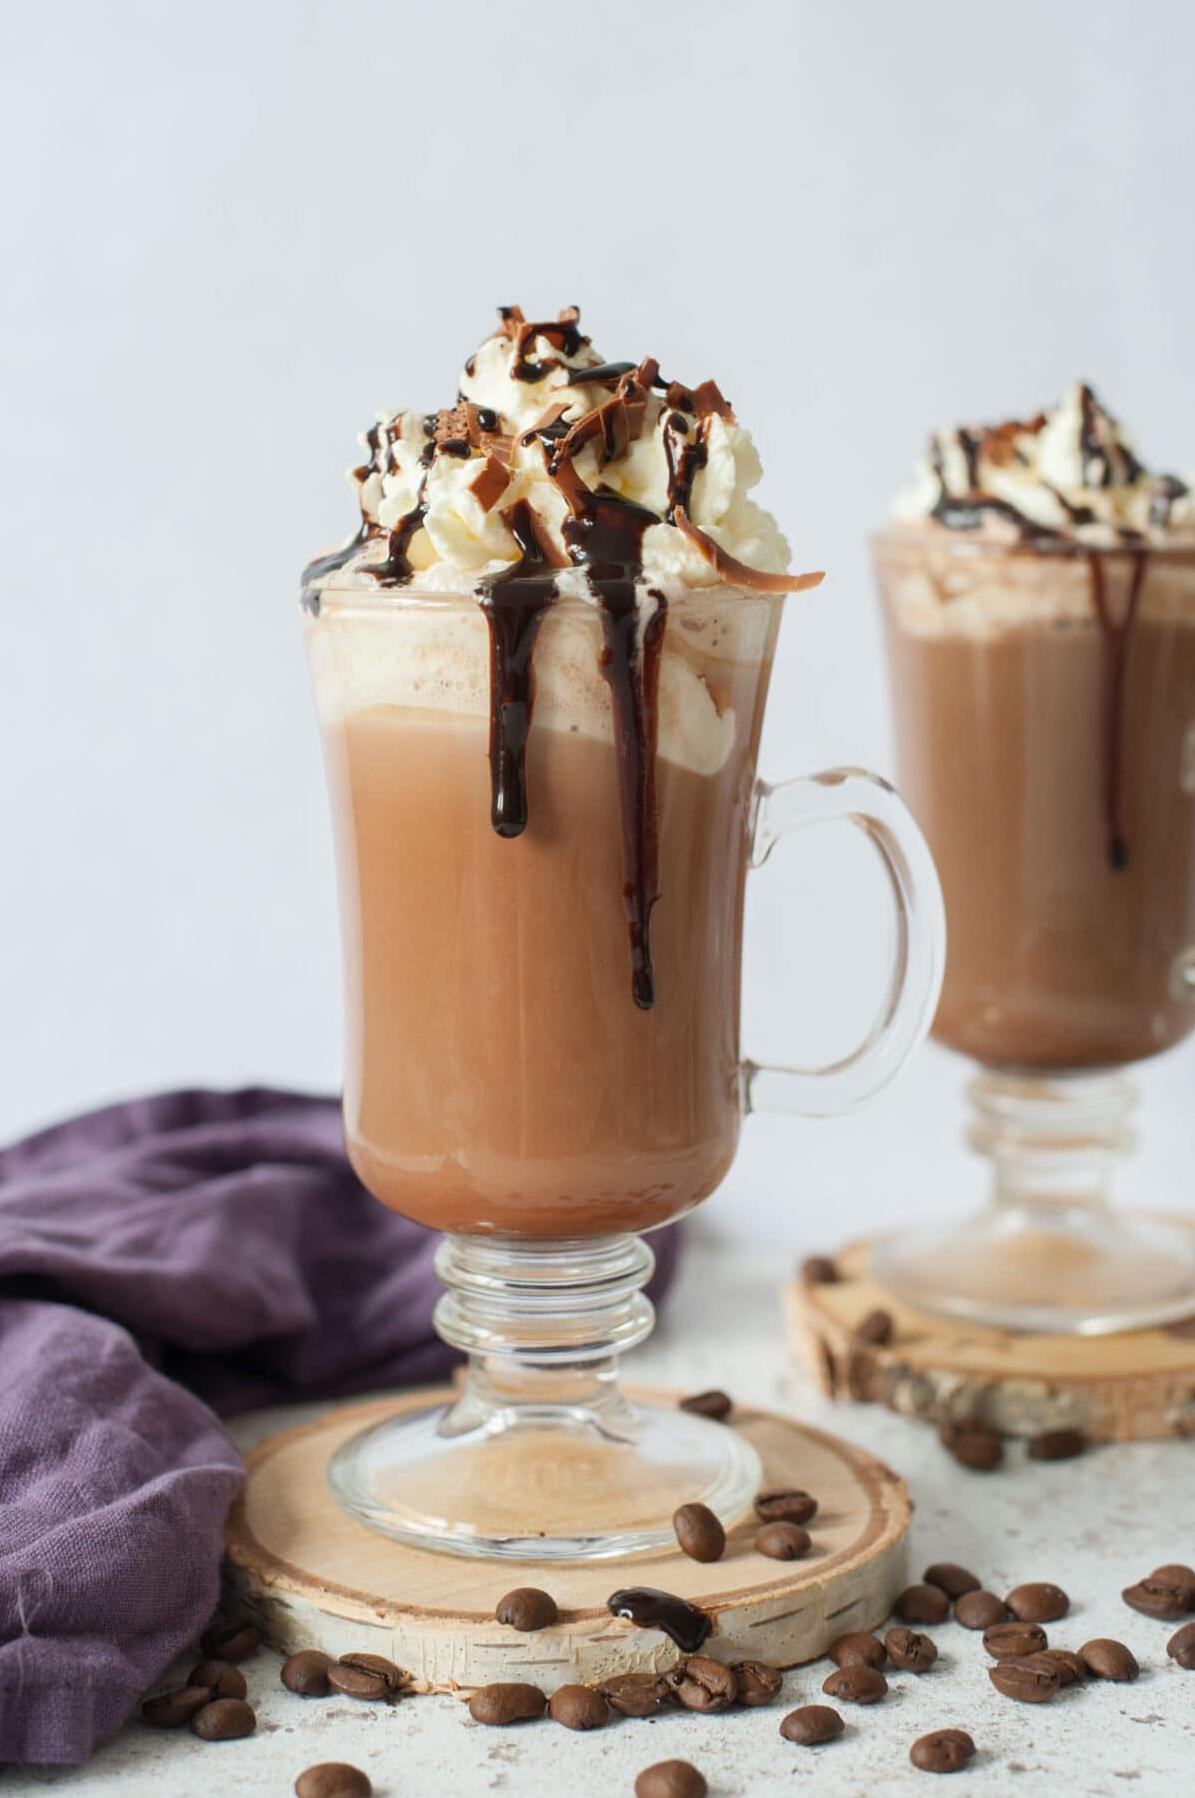  One sip of this delicious Mocha shot and you'll be hooked.